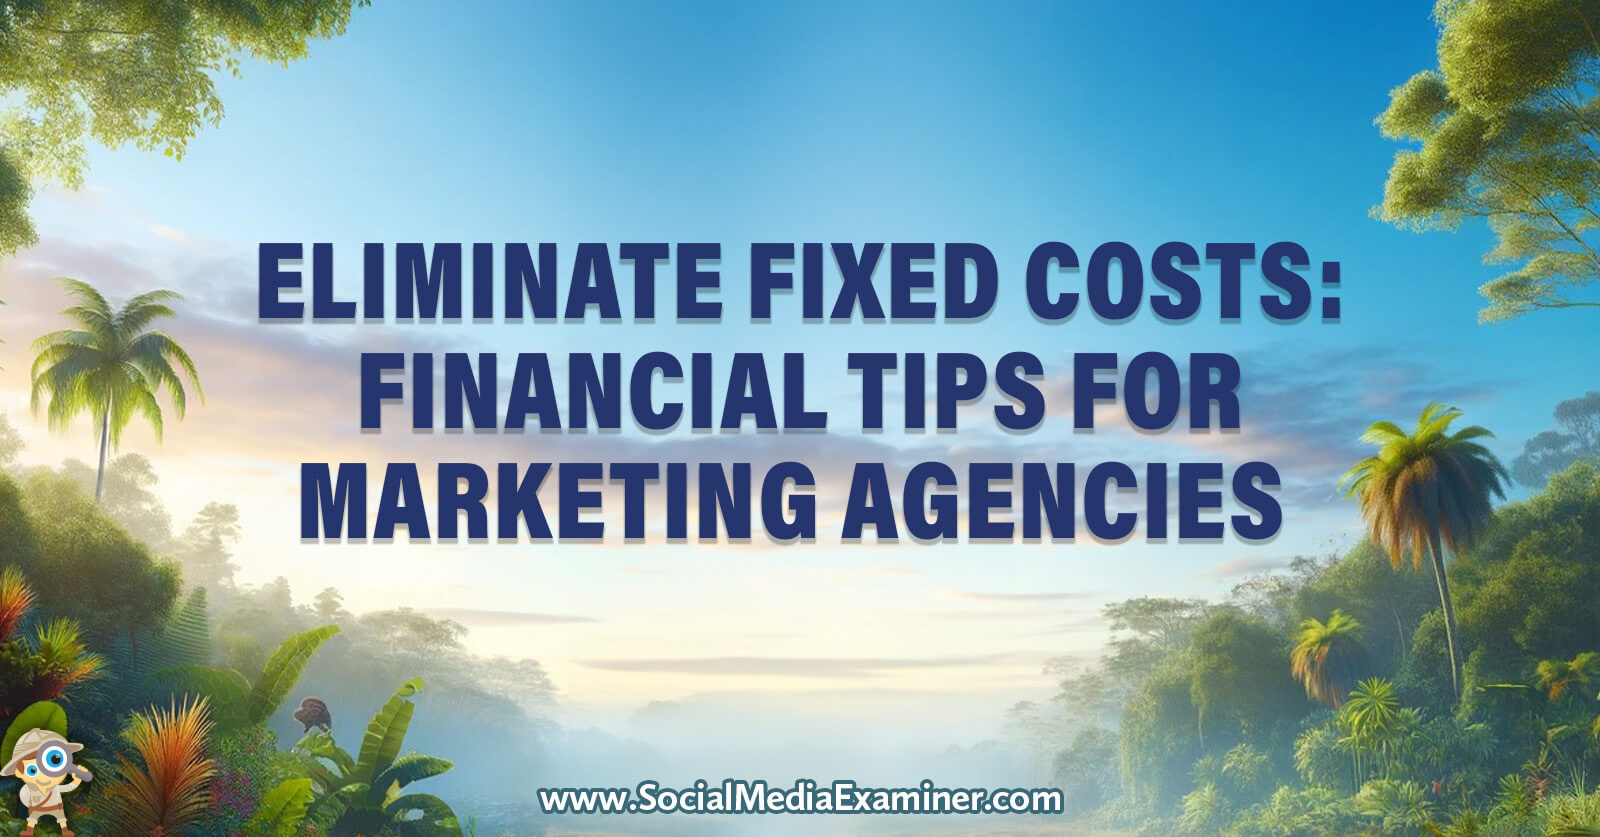 Eliminate Fixed Costs: Financial Tips for Marketing Agencies by Social Media Examiner